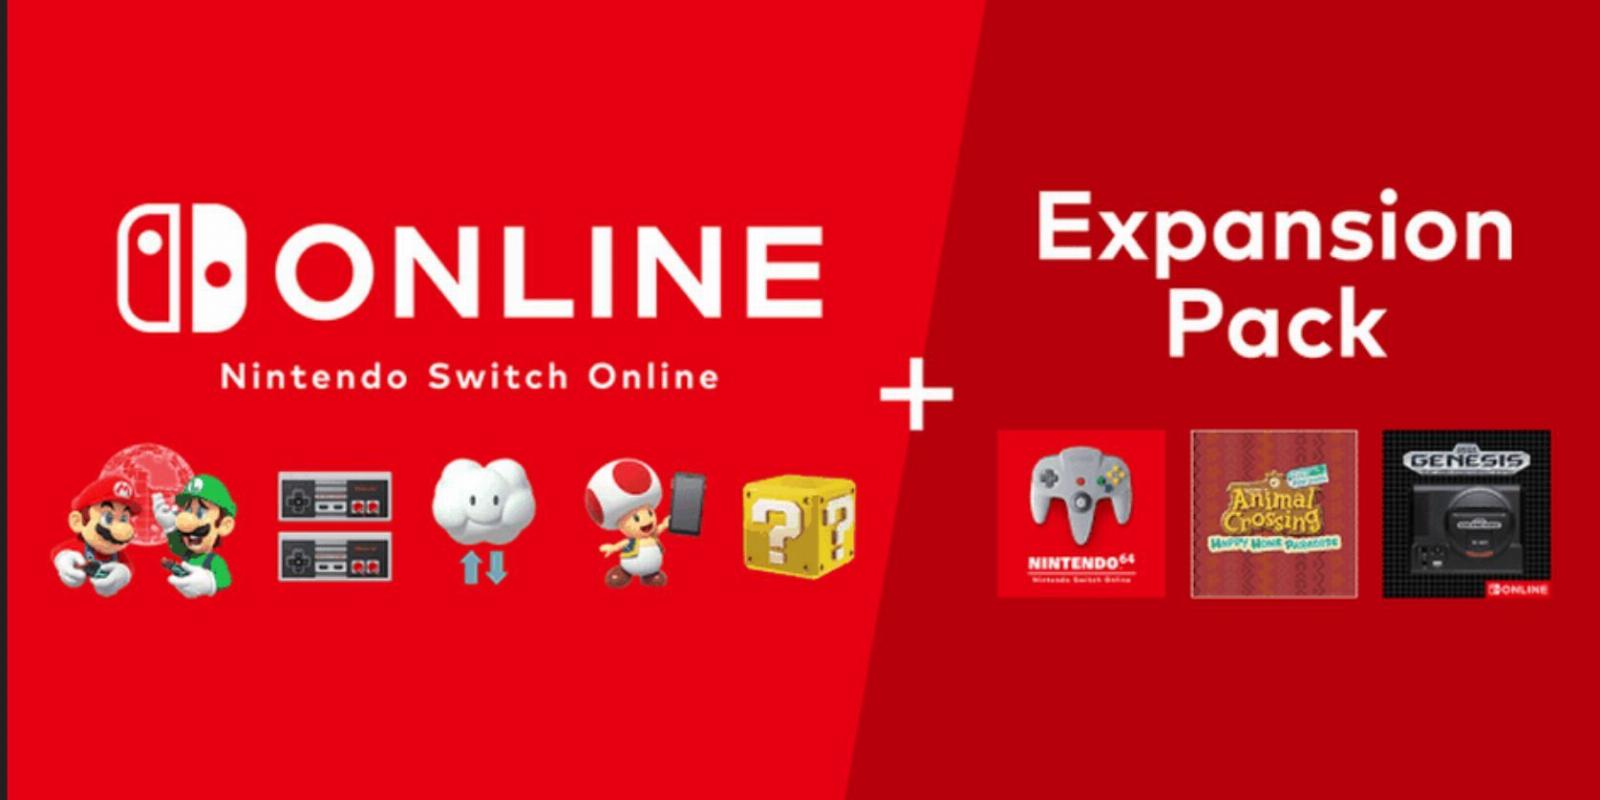 5 Reasons Why You Should Upgrade to the Nintendo Switch Online Expansion Pack